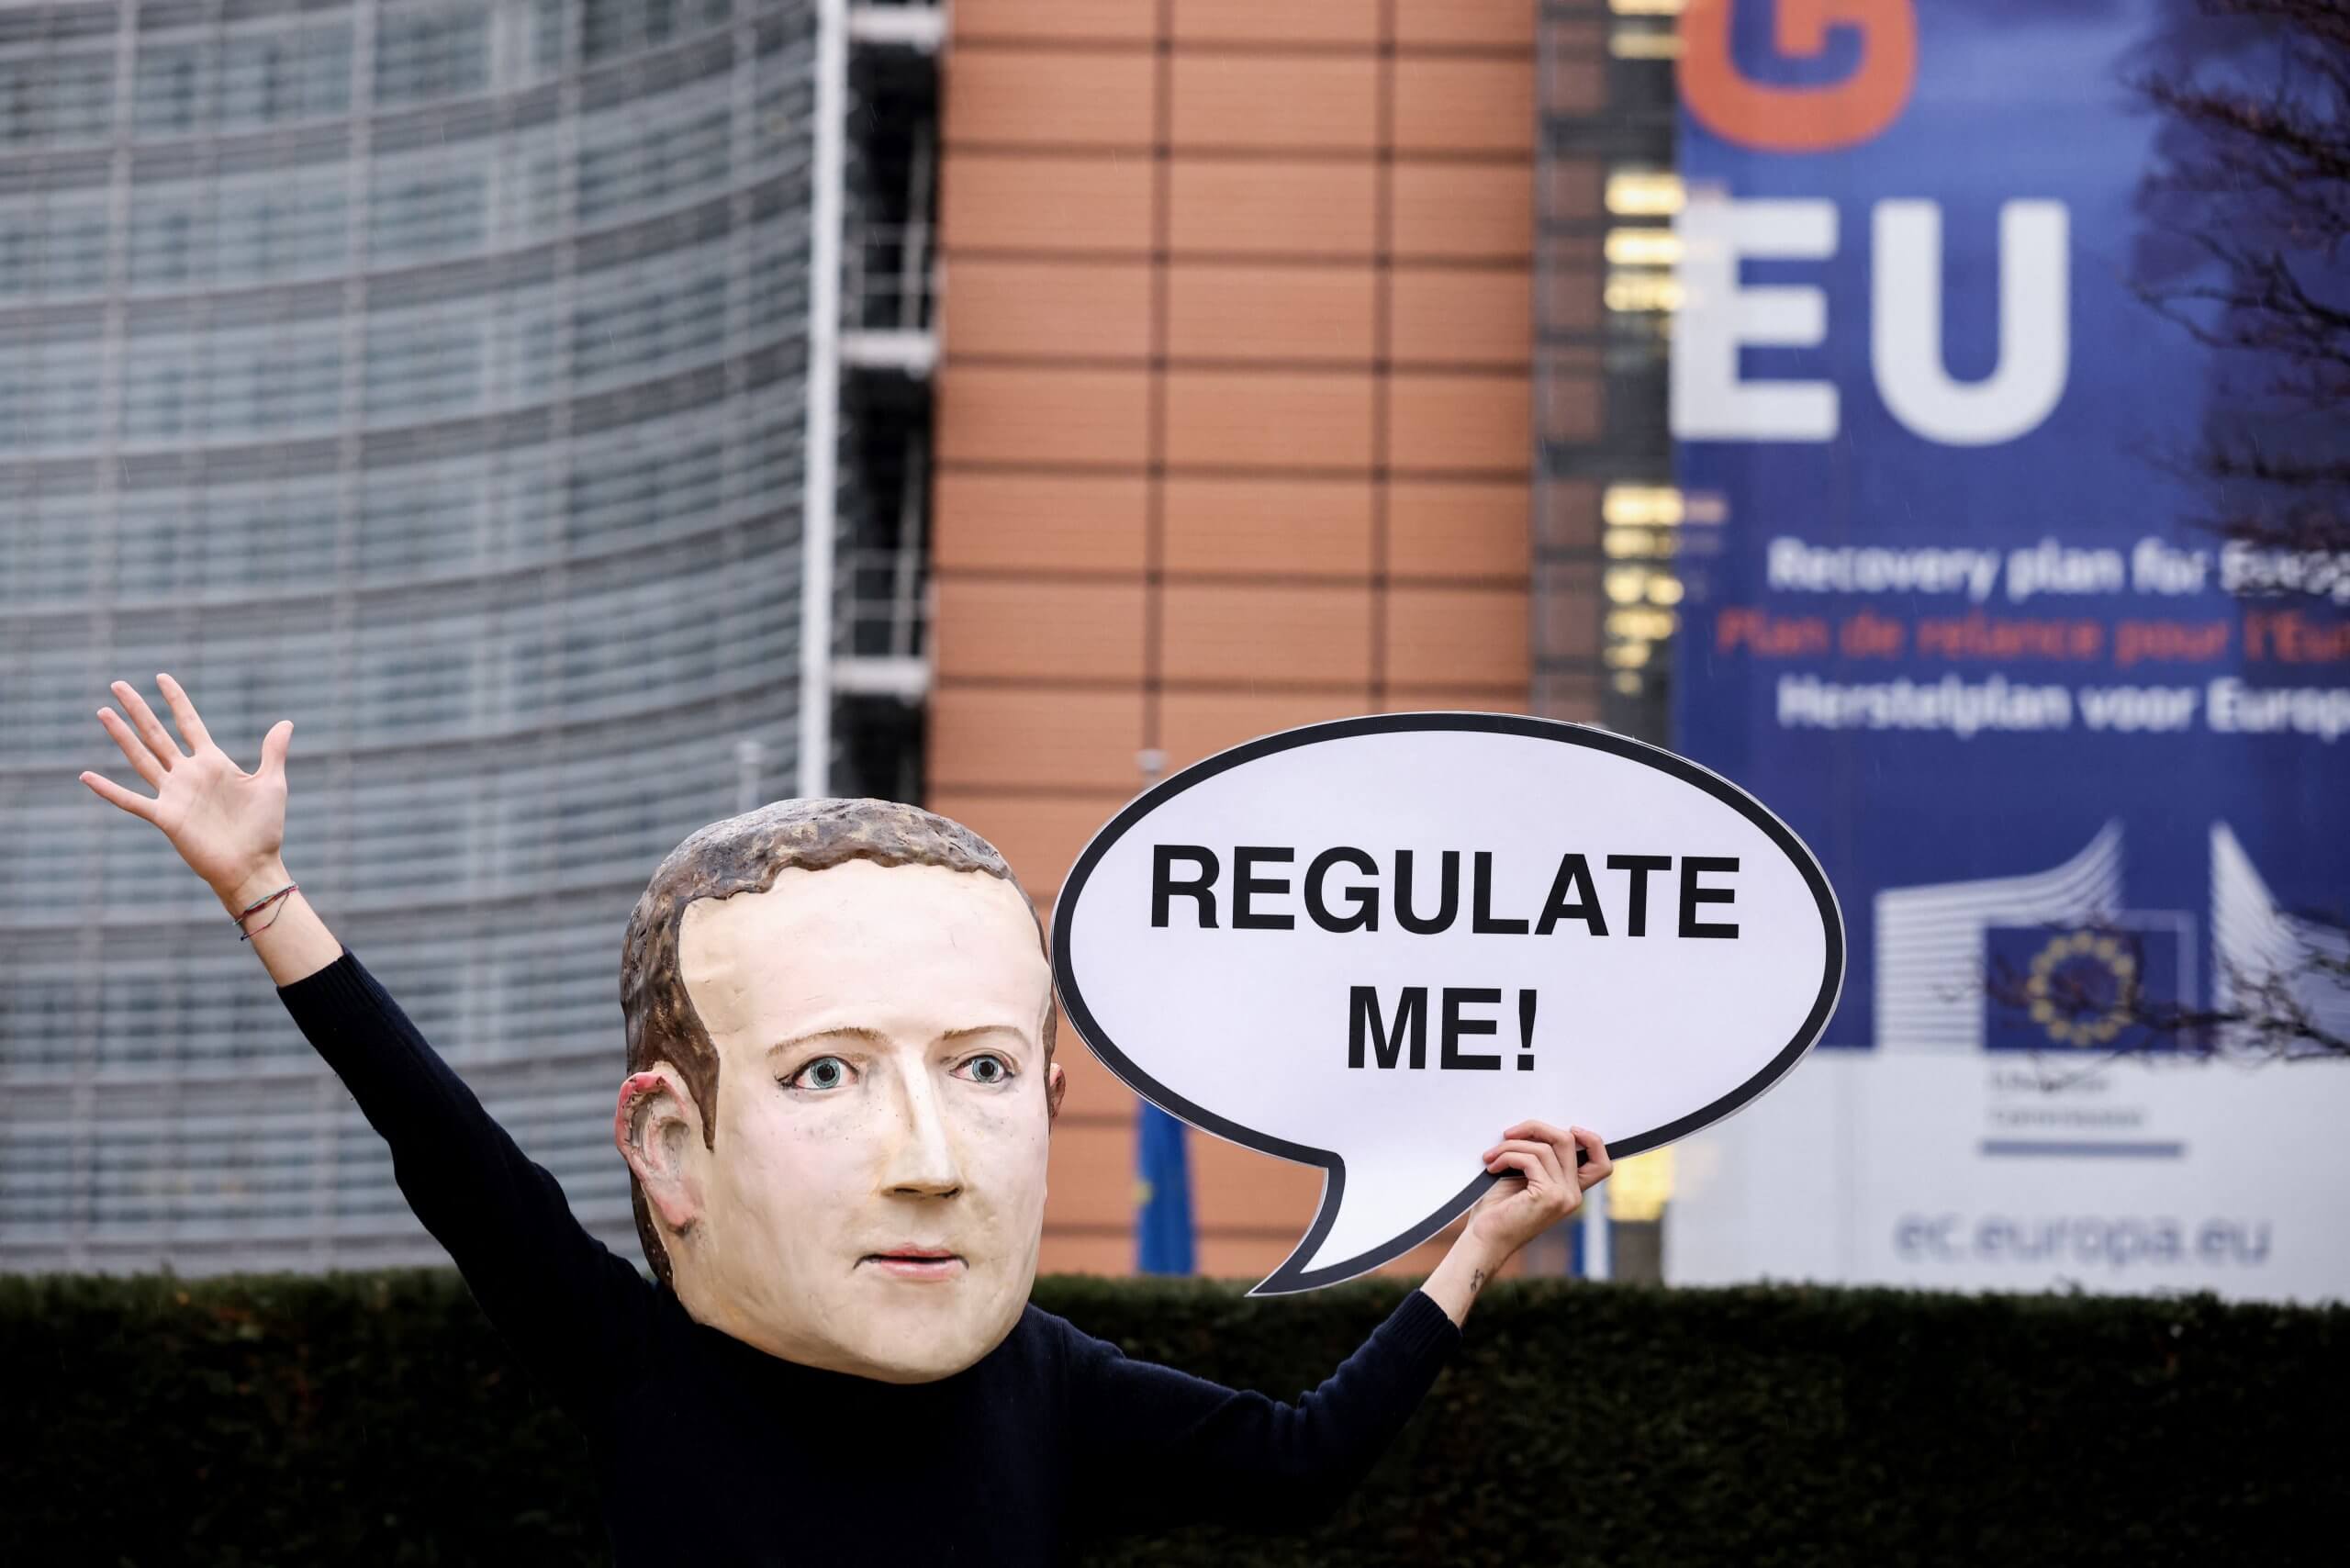 Google, Facebook slapped with their first fine of 2022 in Europe